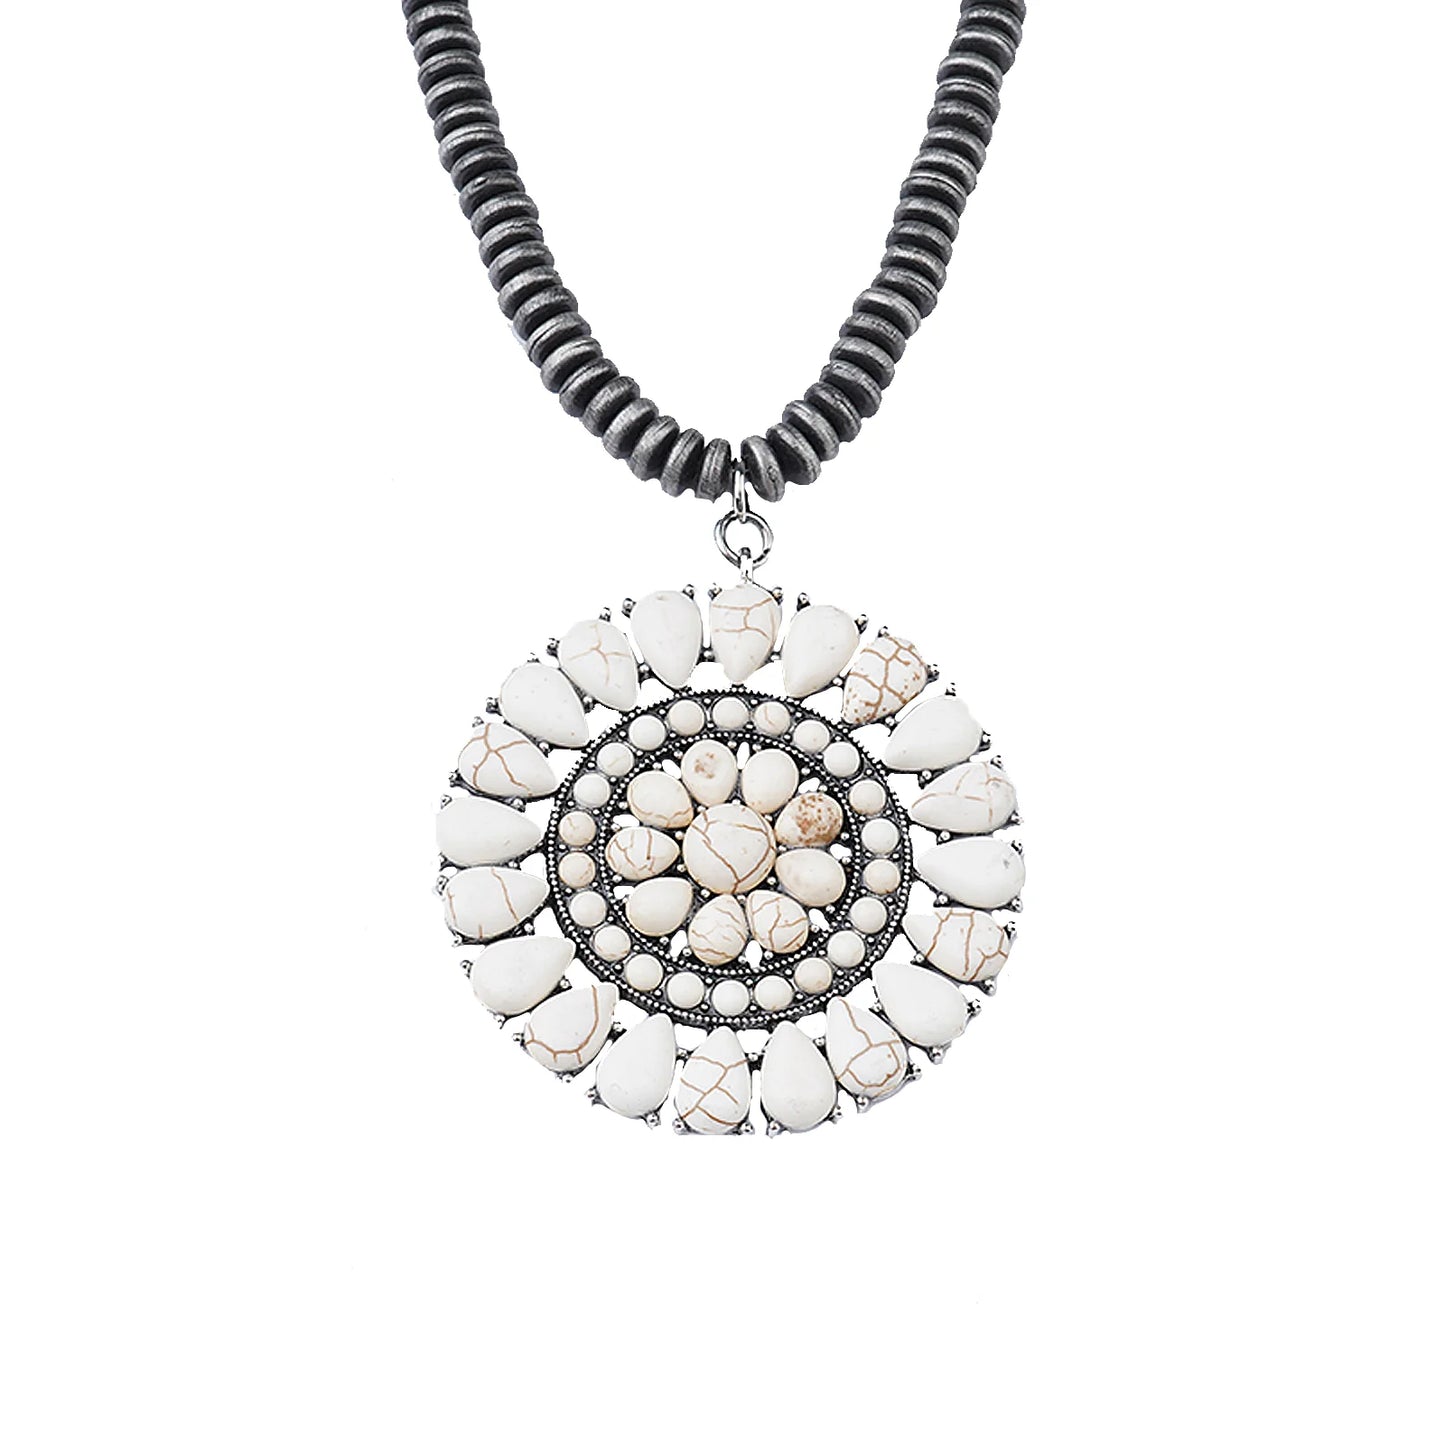 Silver Beads With White-Turquoise Stone Round Floral Shape Necklace